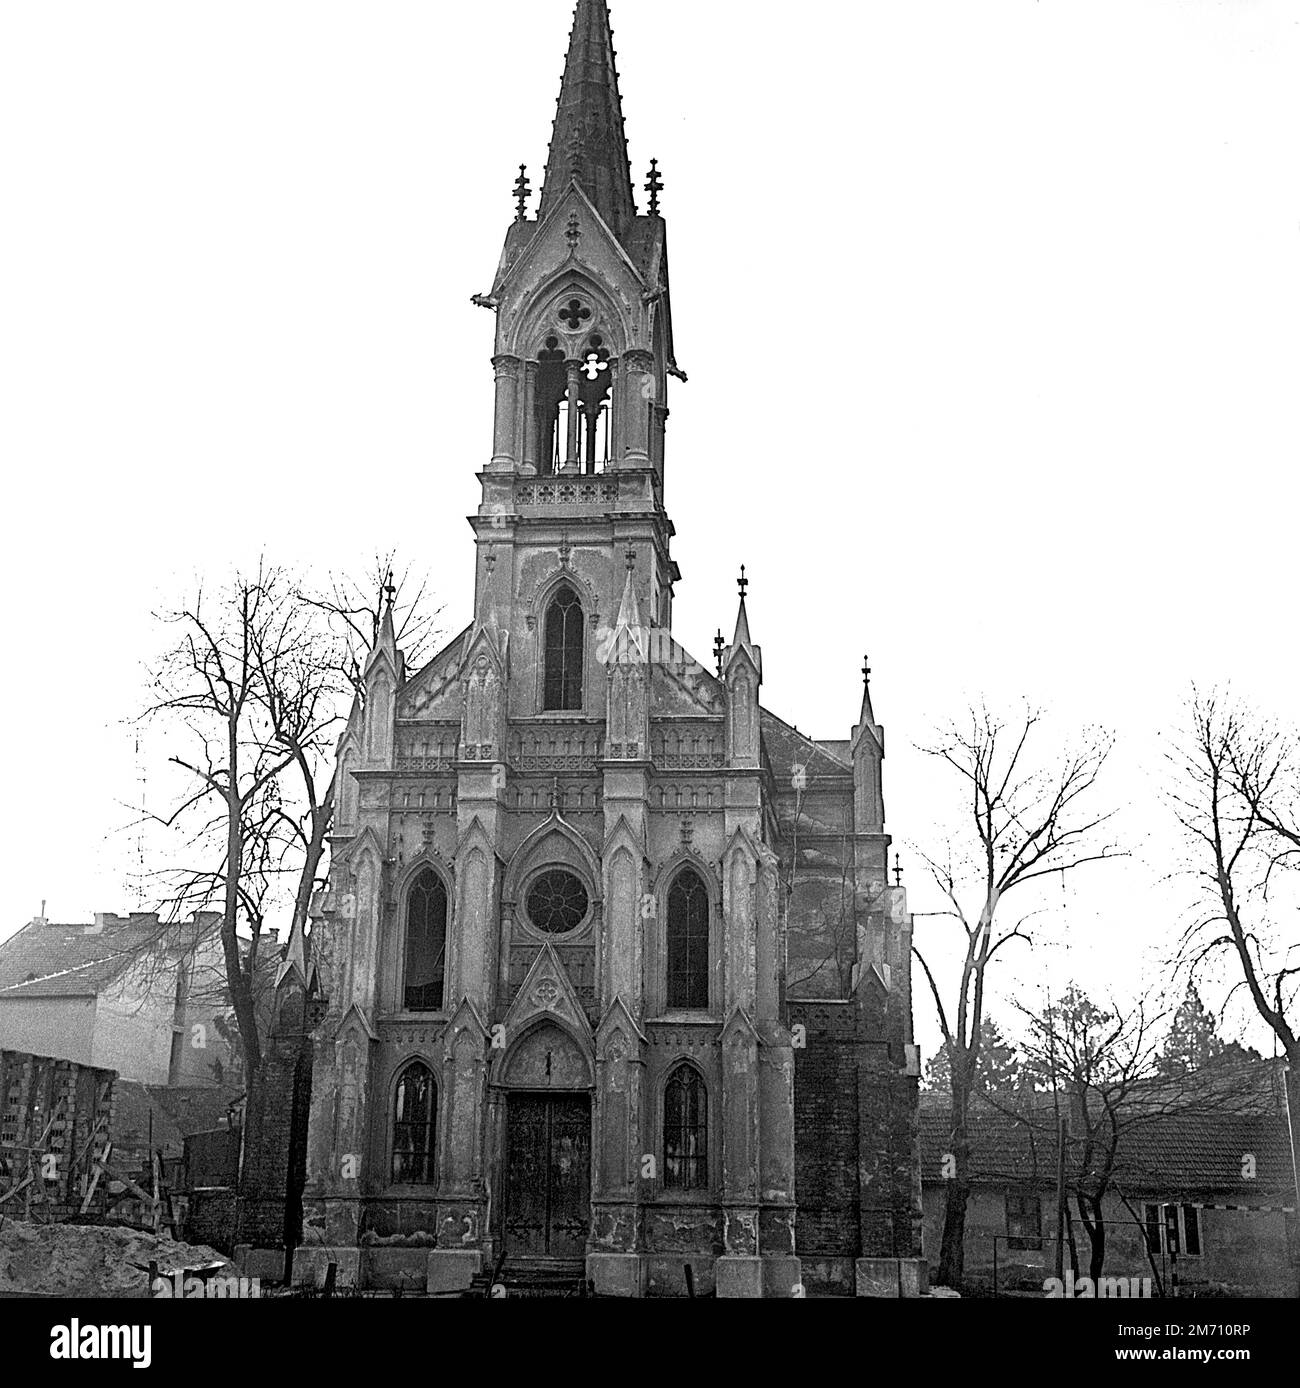 Oradea, Bihor County, Socialist Republic of Romania, approx. 1973. Exterior of St. Ladislaus Roman Catholic Chapel, built in 1900 in the Gothic Revival  style, and abandoned after 1948. Stock Photo